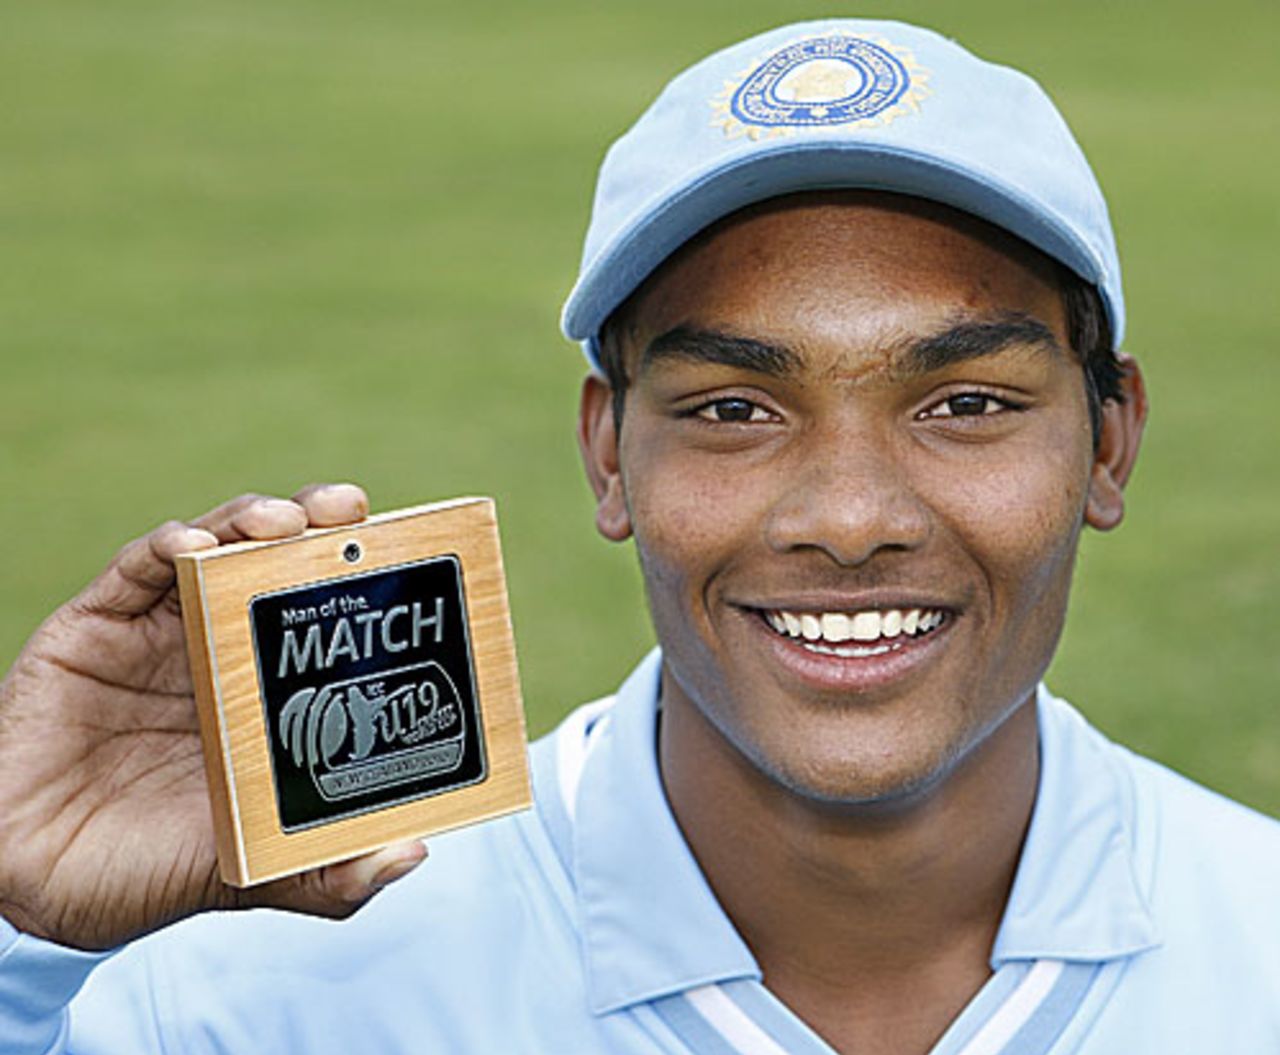 Sandeep Sharma was the Man of the Match for his parsimonious figures of 3 for 11, India Under-19s v Hong Kong Under-19s, 11th Match, Group A, ICC Under-19 World Cup, Christchurch, January 17, 2010